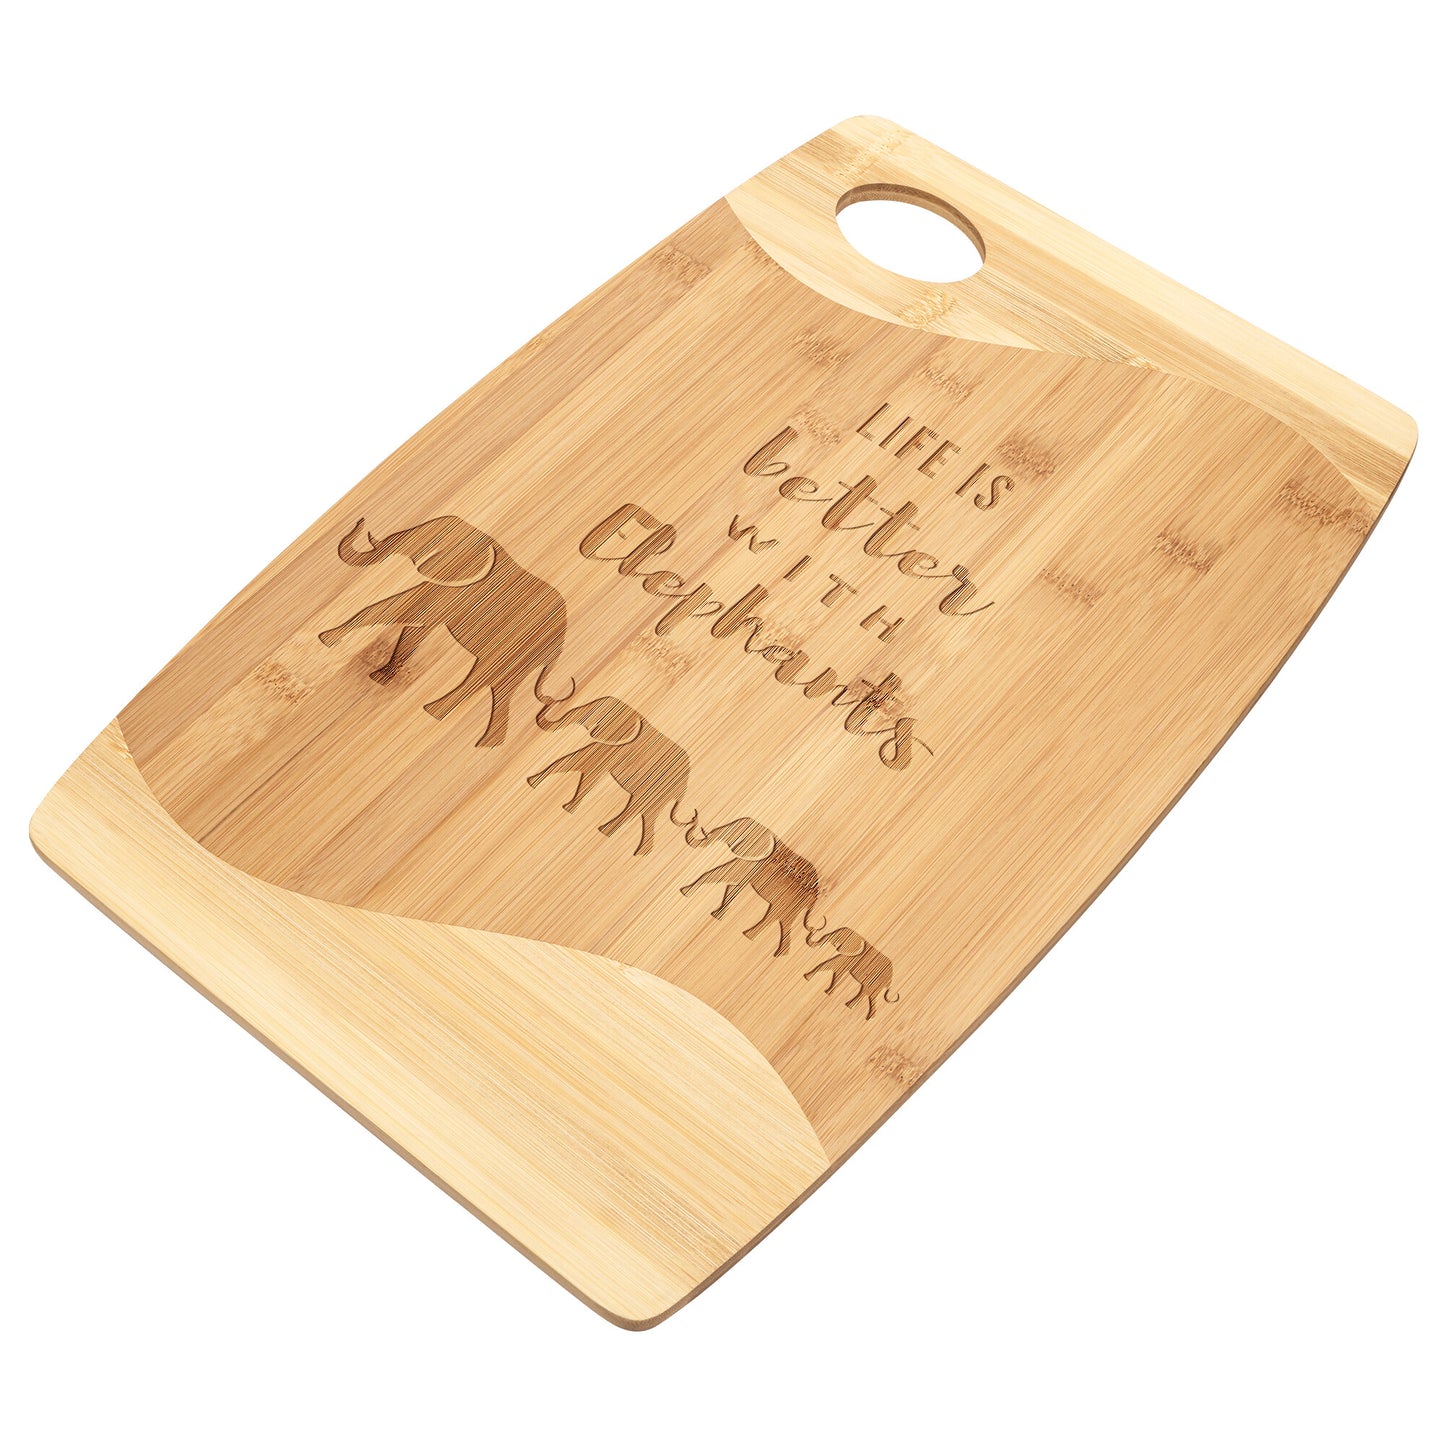 Rounded Rectangular Cutting Board with Elephants